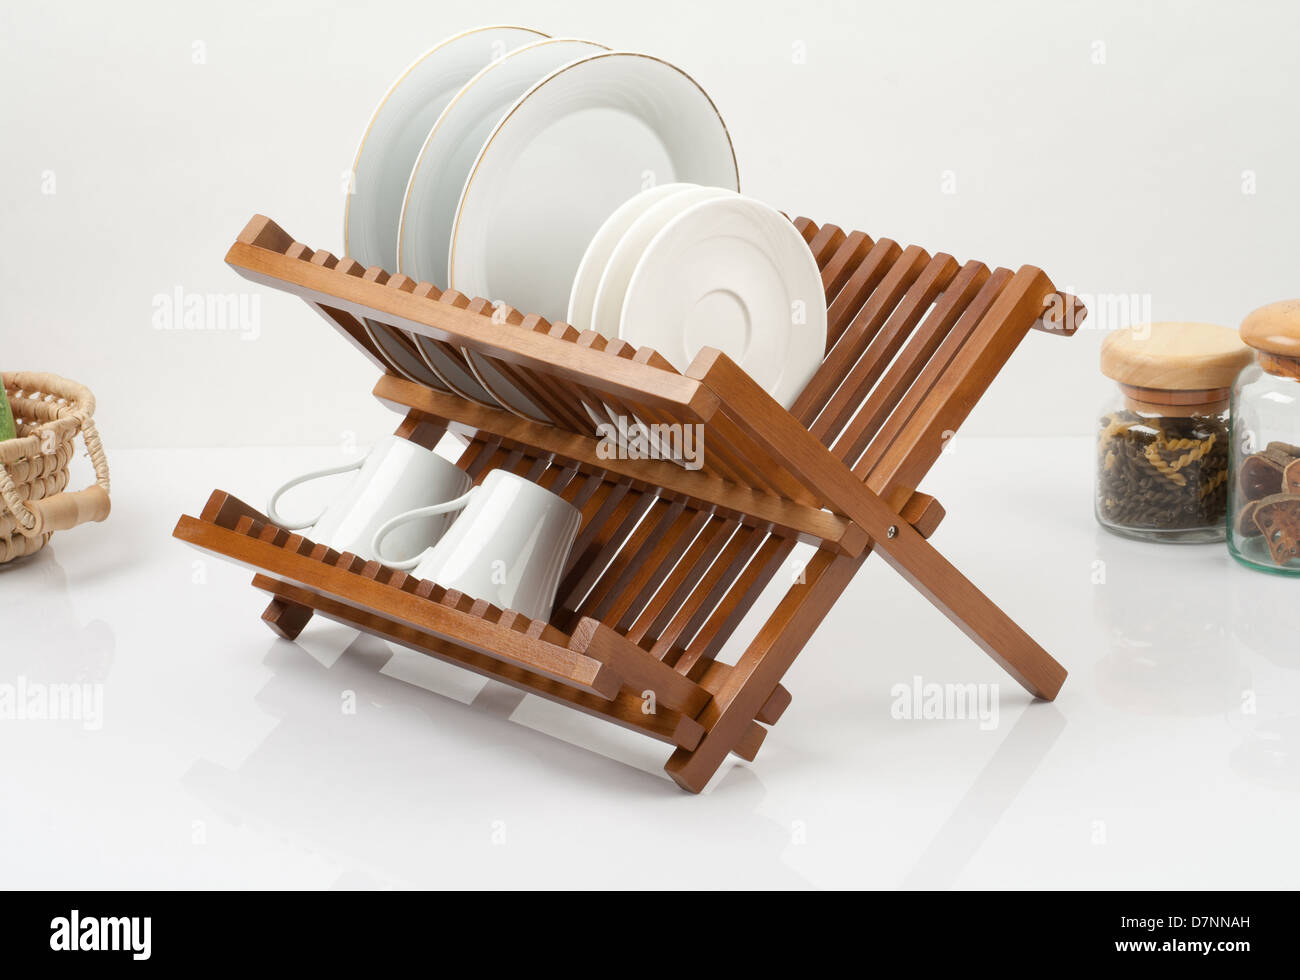 A small wooden shelf for keeping dishes and cups Stock Photo